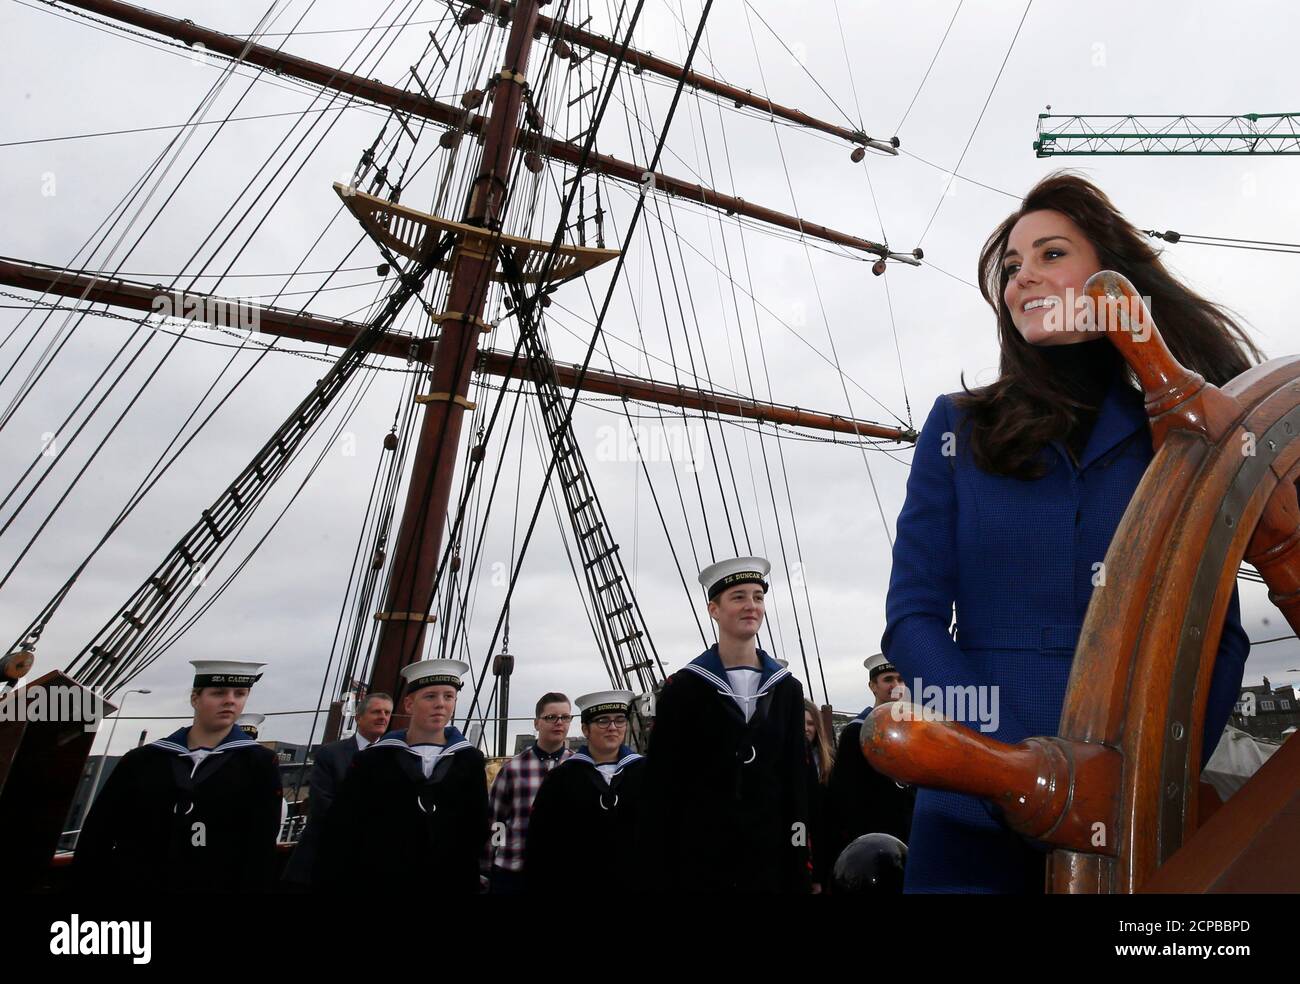 Britain's Catherine, Duchess of Cambridge tours the original Royal Research Ship Discovery during her visit to Dundee, Scotland, Britain October 23, 2015.  REUTERS/Danny Lawson/Pool Stock Photo